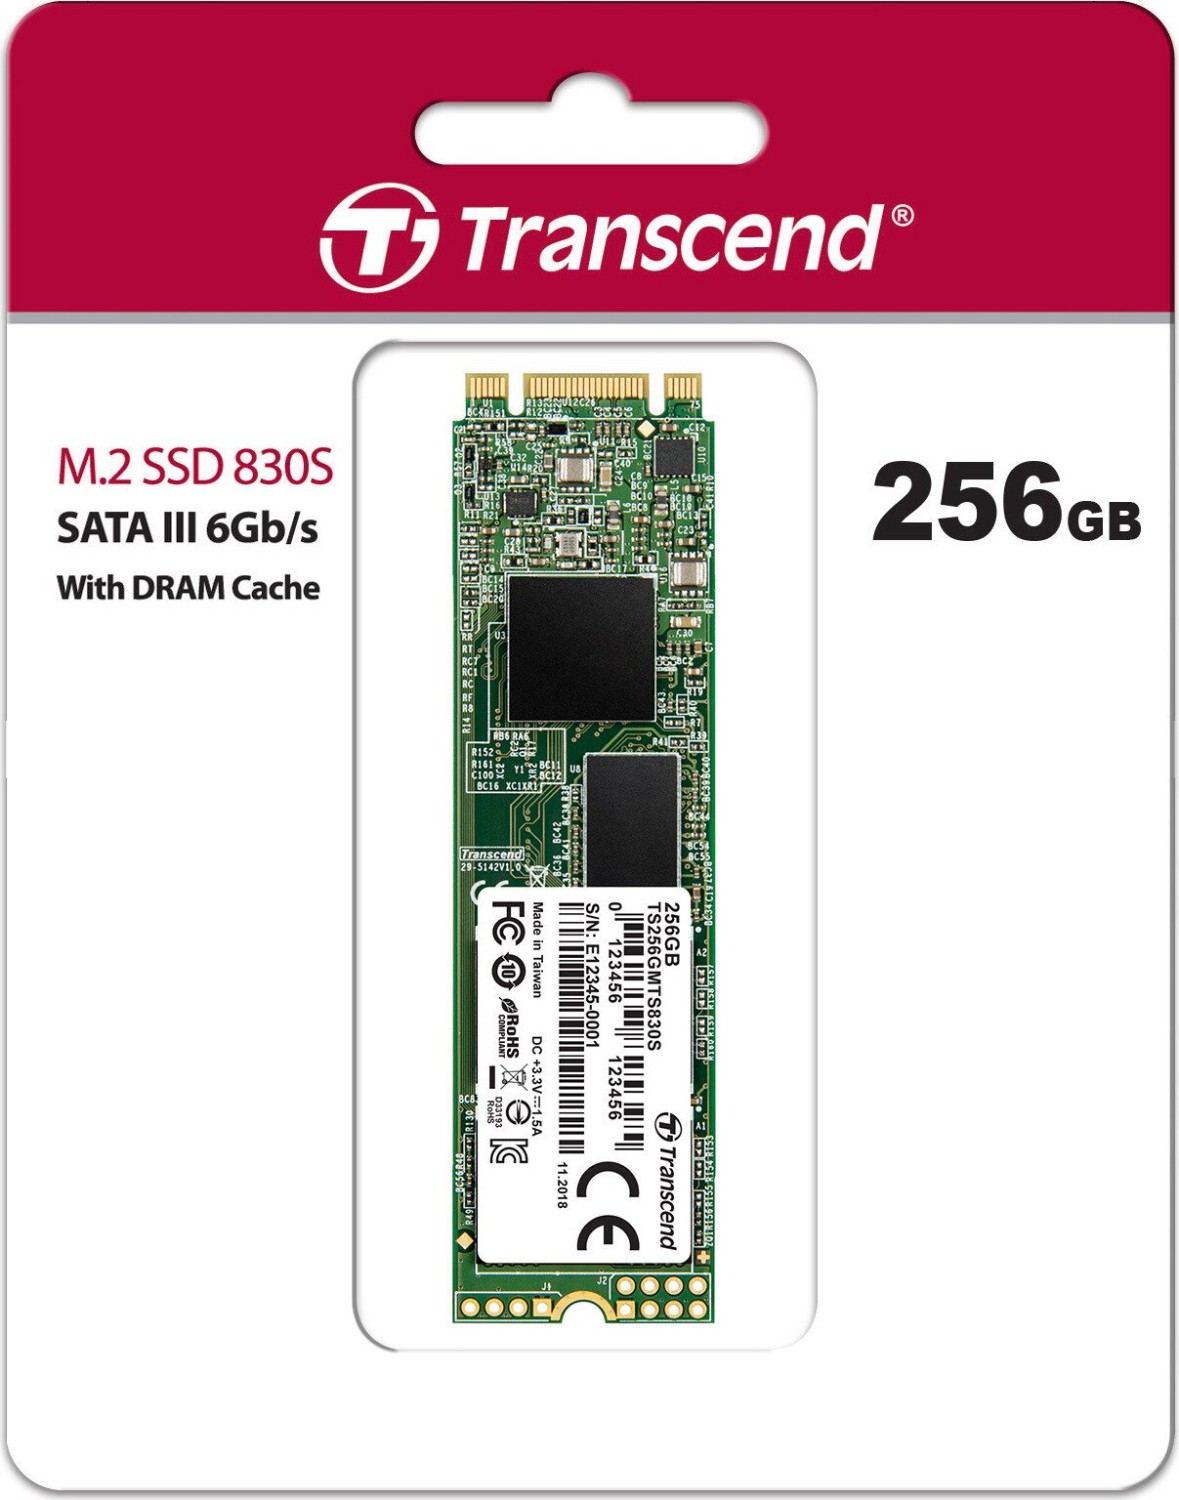 Transcend MTS830S - SSD - 256 GB - SATA 6Gb/s - TS256GMTS830S - Solid State  Drives 